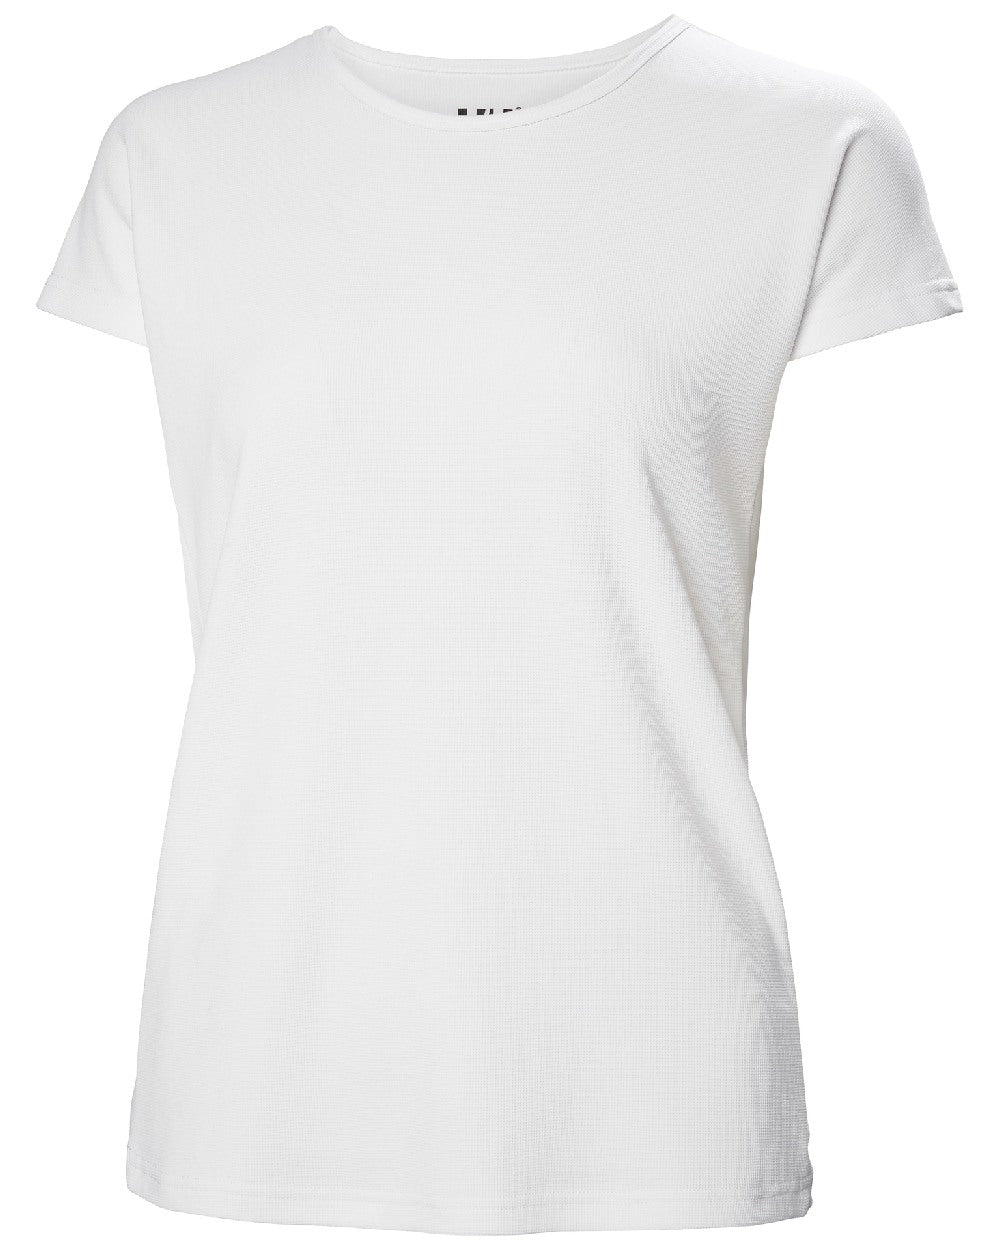 White coloured Helly Hansen womens crewline quick dry top on white background 